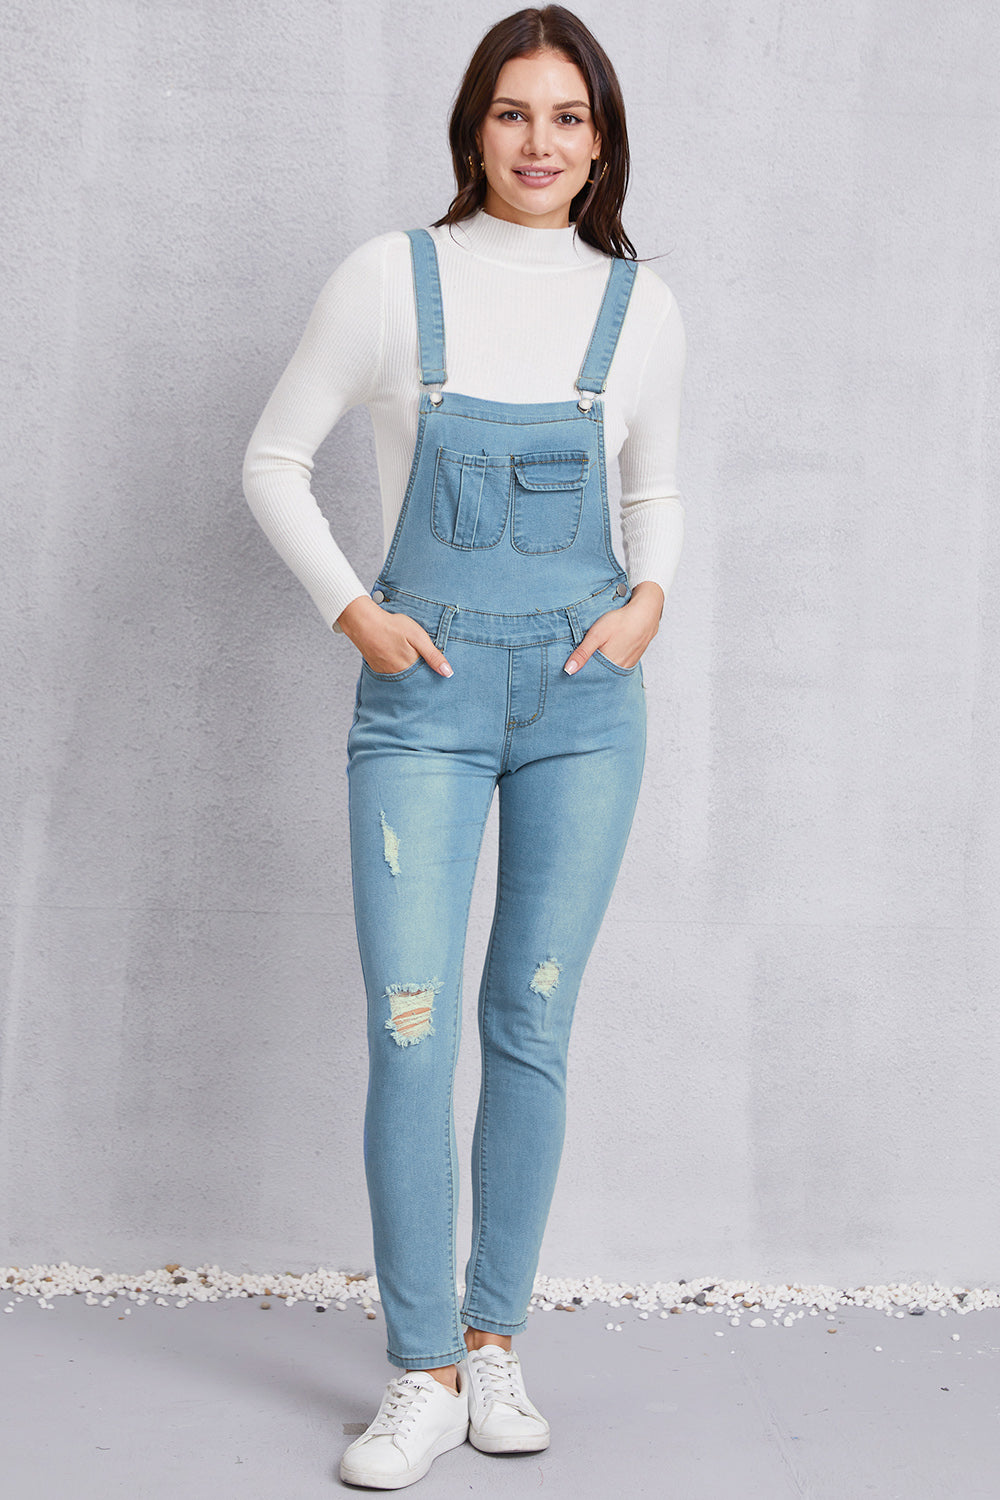 Distressed Washed Denim Overalls with Pockets - Babbazon new